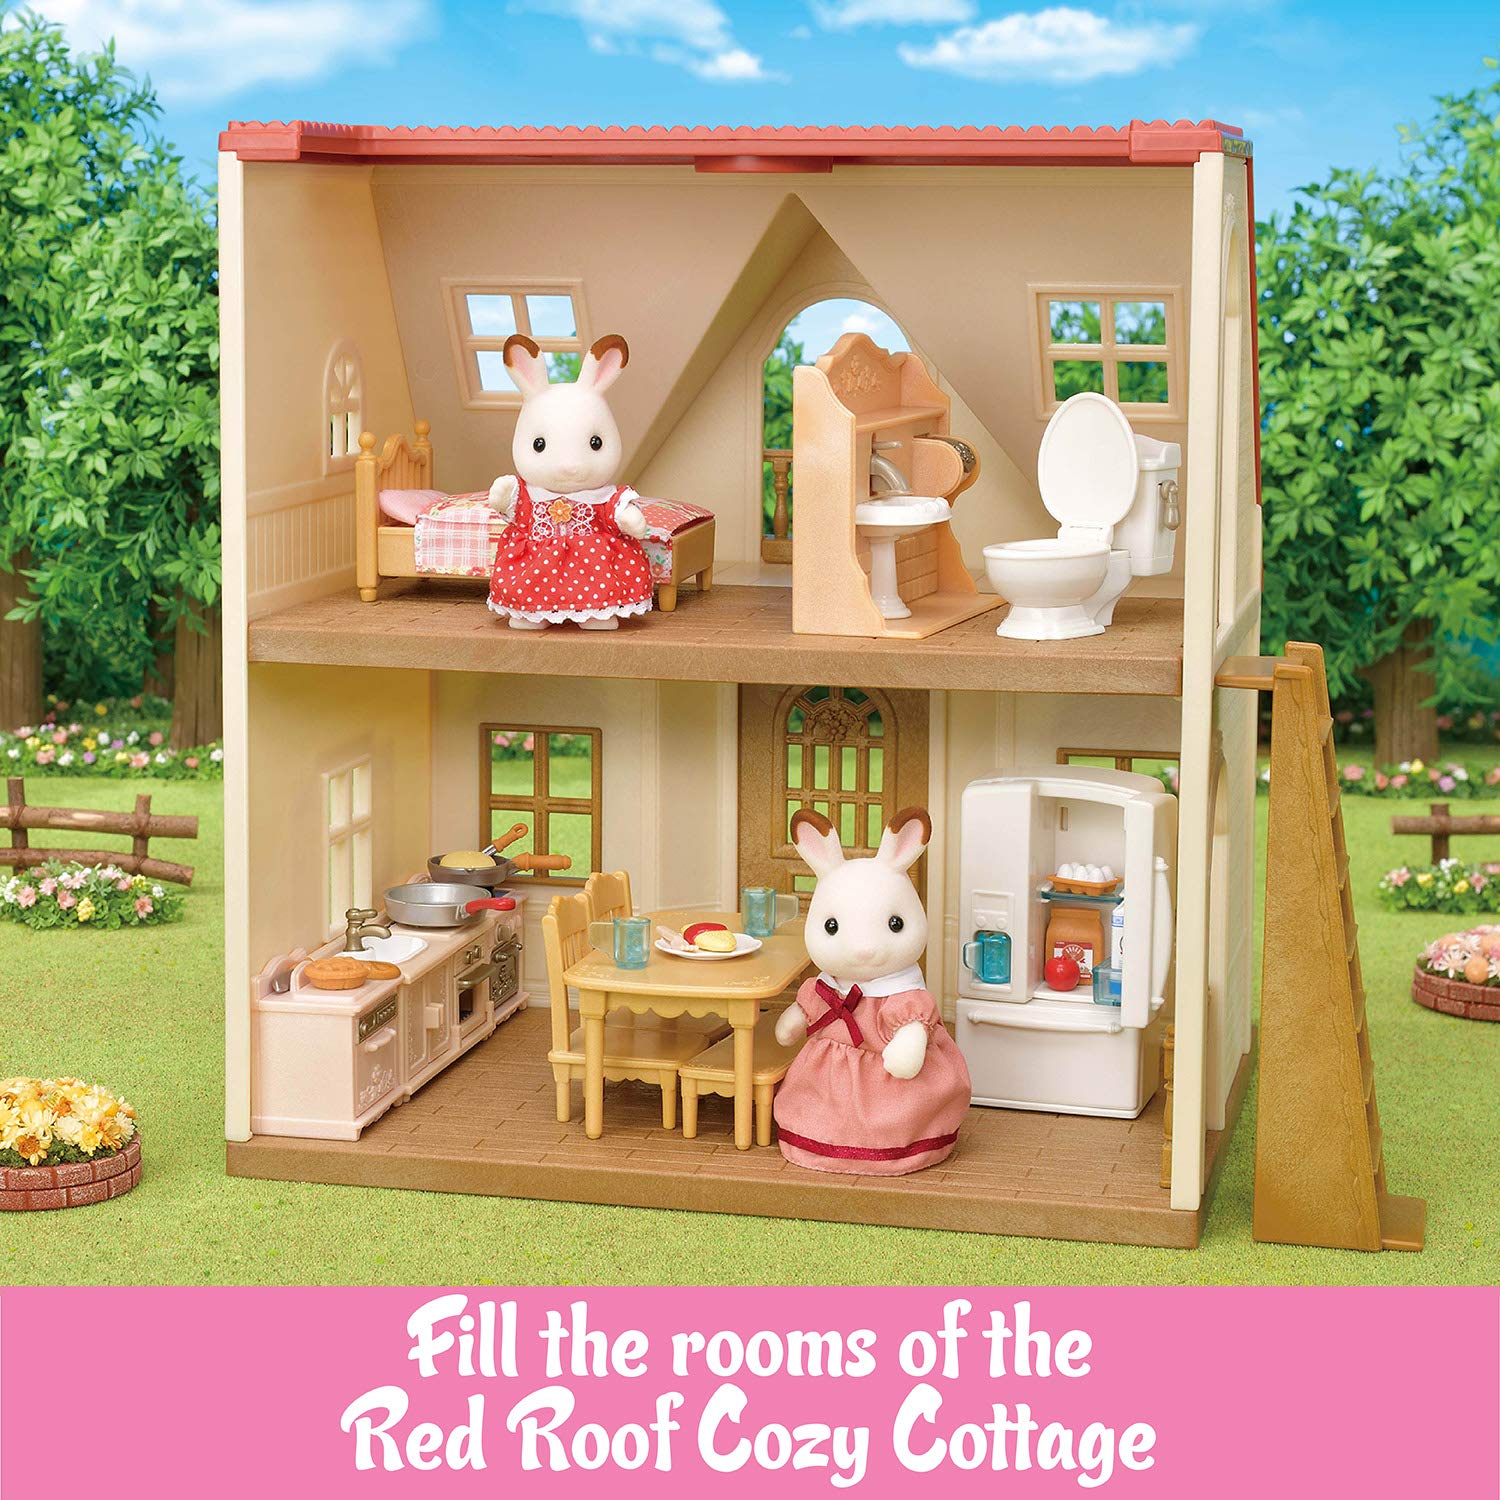 Calico Critters Playful Starter Furniture Set, Toy Dollhouse Furniture and Accessories Set with Figure Included